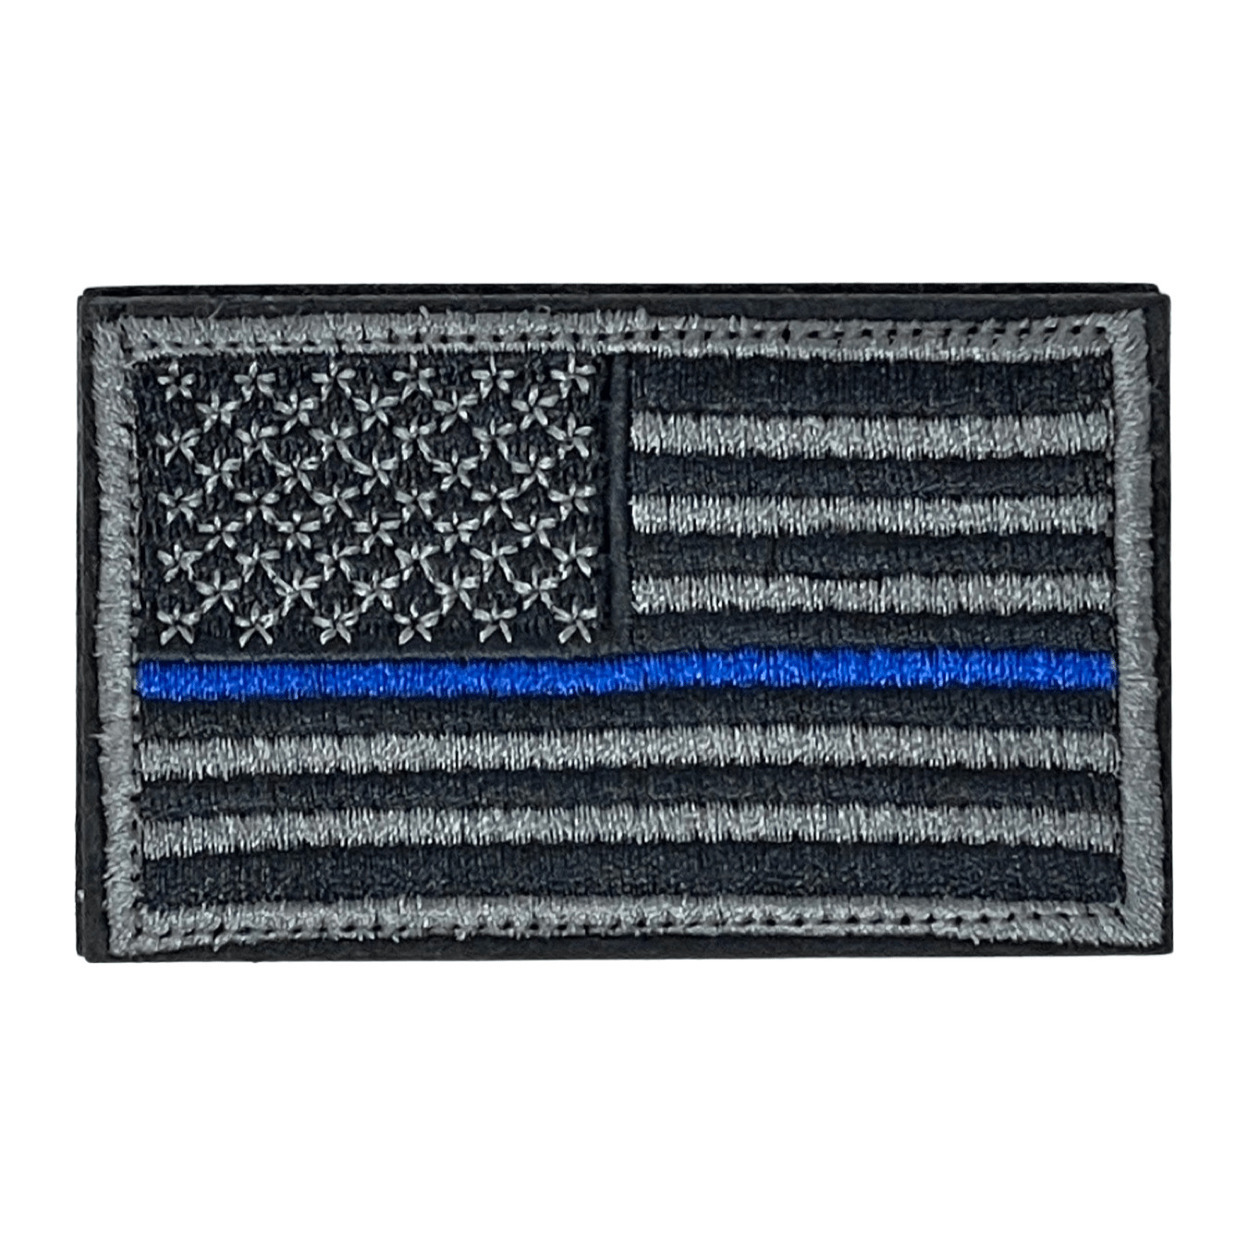 Tactical USA Flag Patch With Detachable Backing - Aged Blue Line